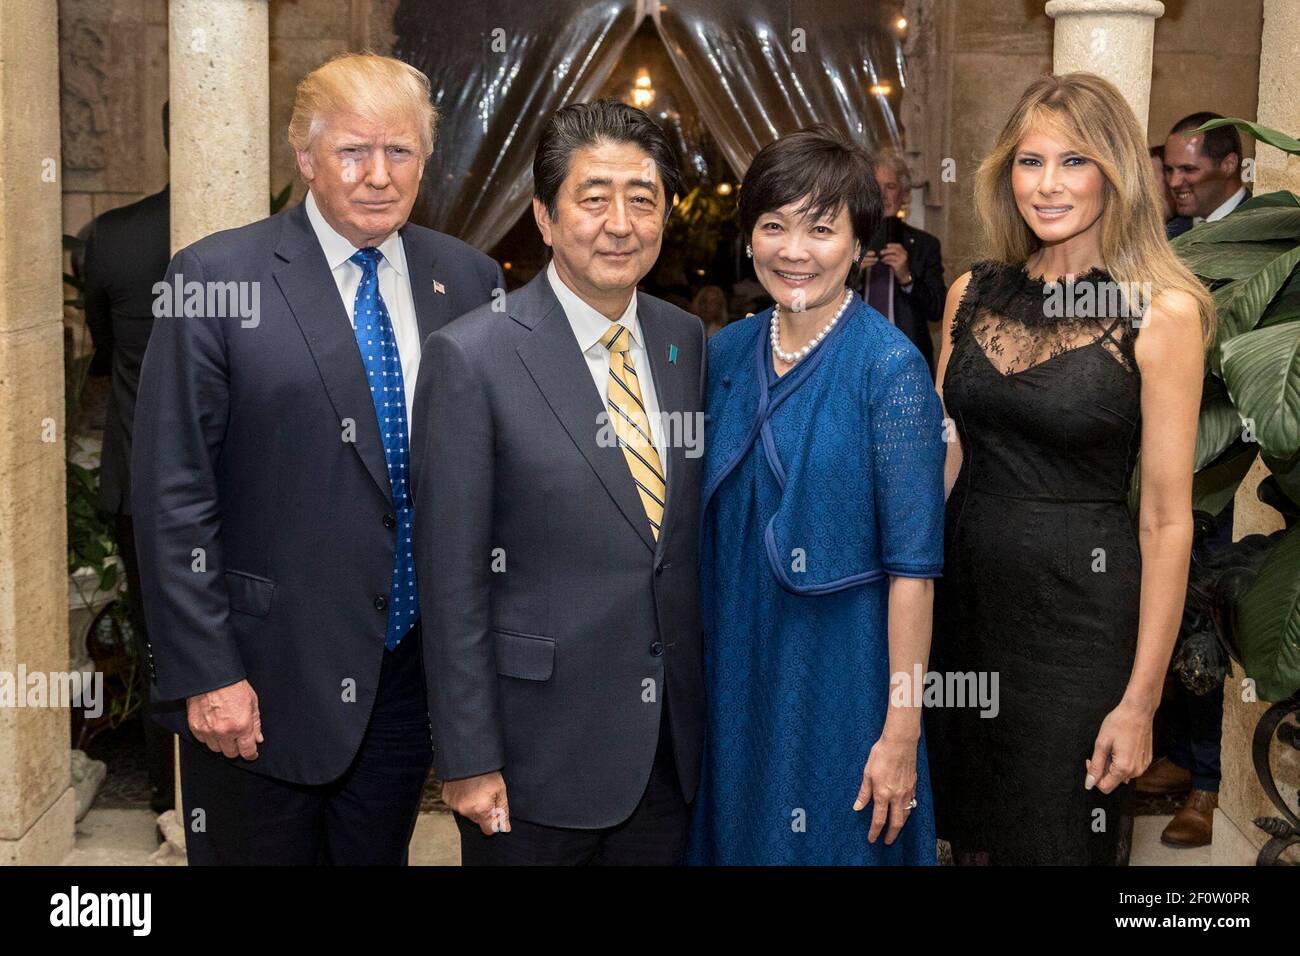 President Donald Trump and First Lady Melania Trump are joined by Japanese Prime Minister ShinzÅ Abe and his wife Mrs. Akie Abe as they pose for photos Saturday Feb. 11 2017 at Mar-a-Lago in Palm Beach FL. Stock Photo